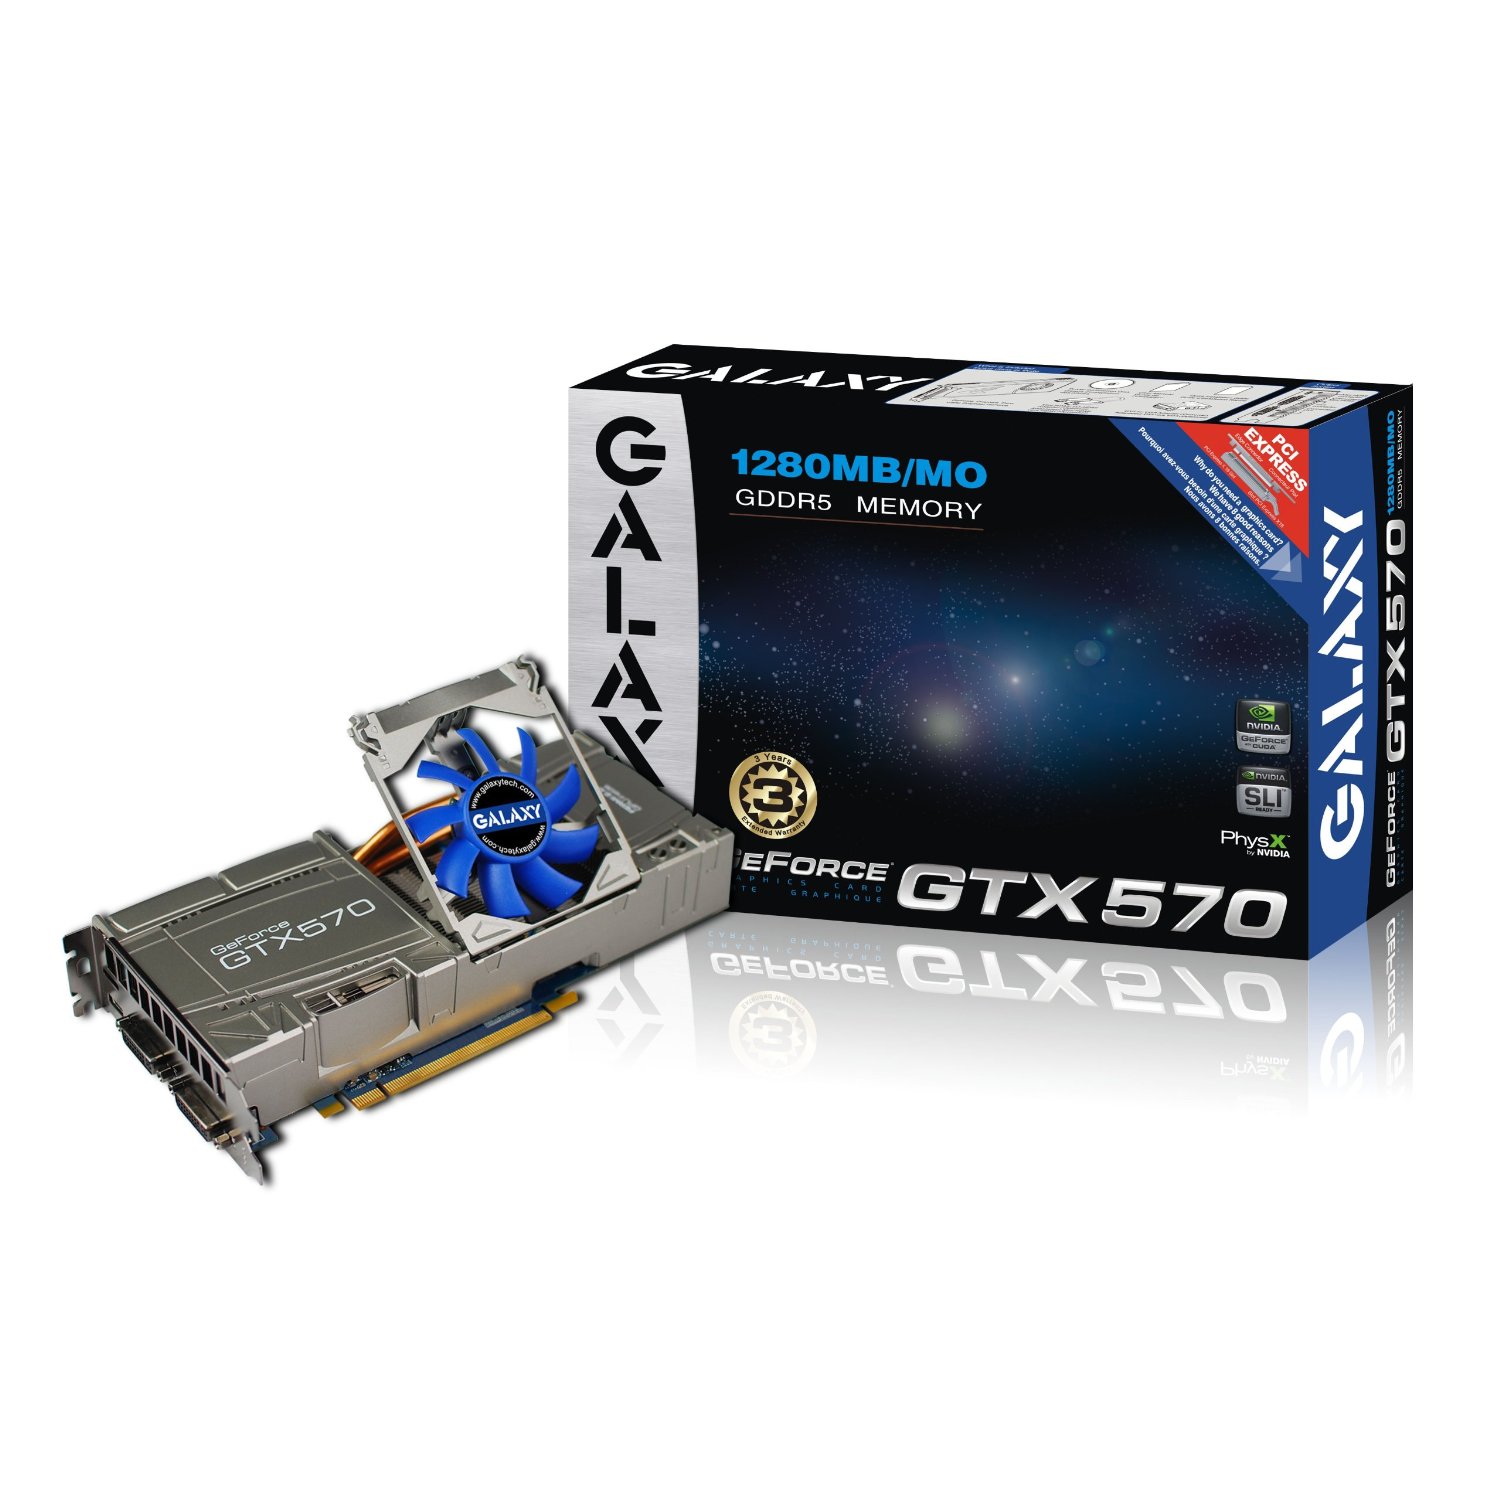 Deal of the Day: Galaxy GTX 570 1280MB GDDR5